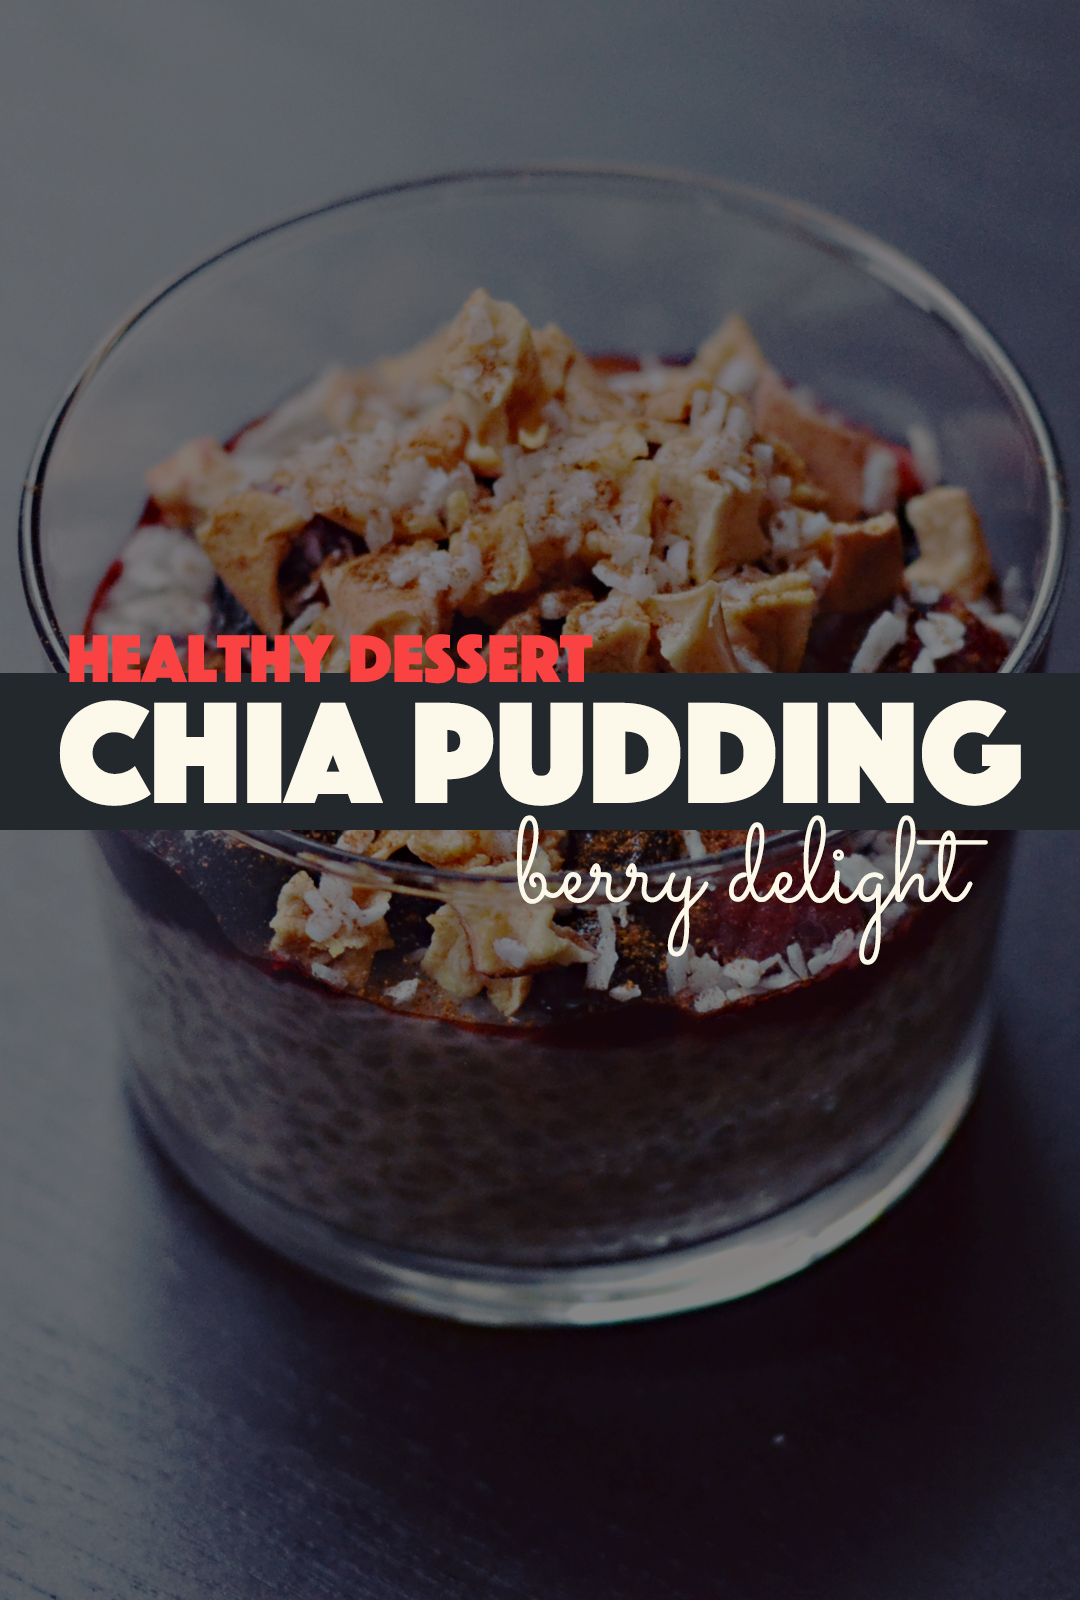 Healthy Chia Pudding Berry Delight | http://BananaBloom.com #chiapudding #chia #healthy #dessert #rawfood